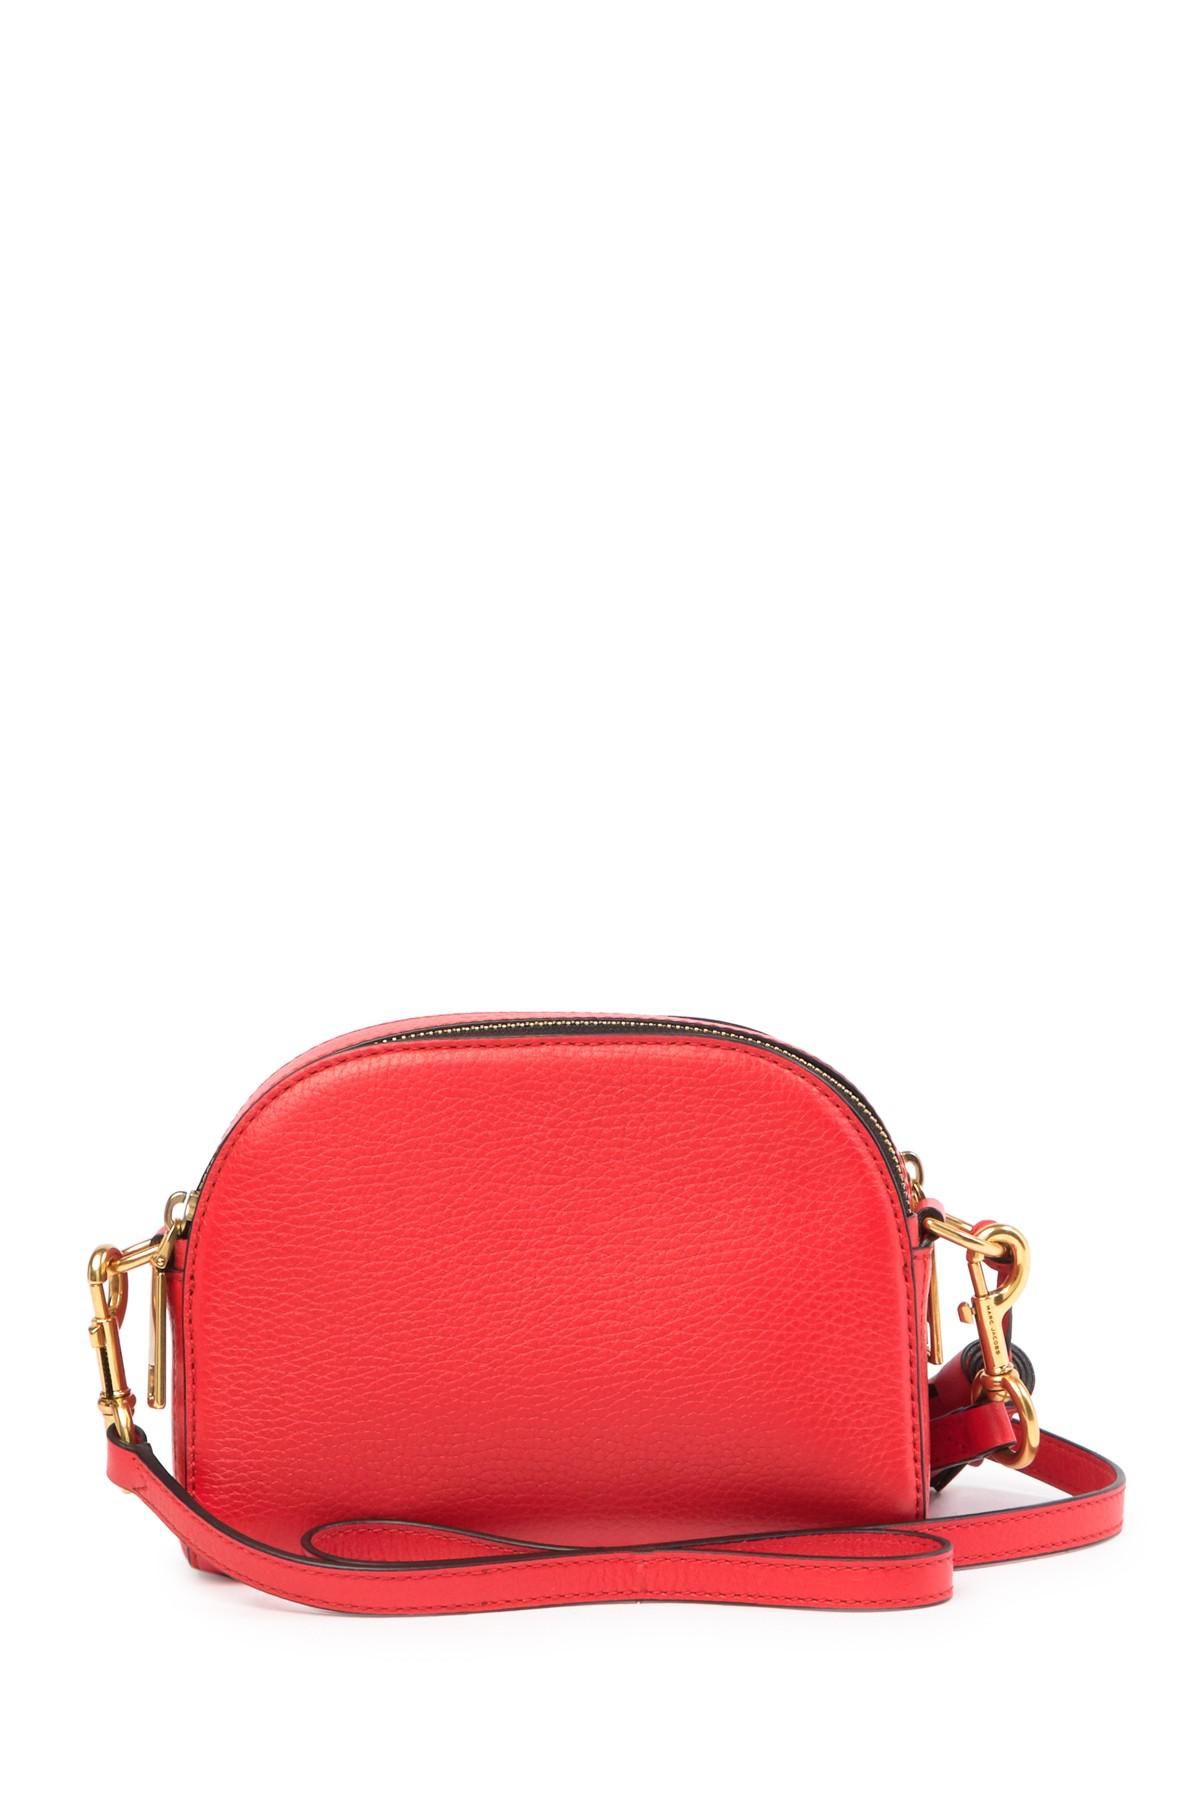 Marc Jacobs Shutter Leather Crossbody Bag in Red - Lyst